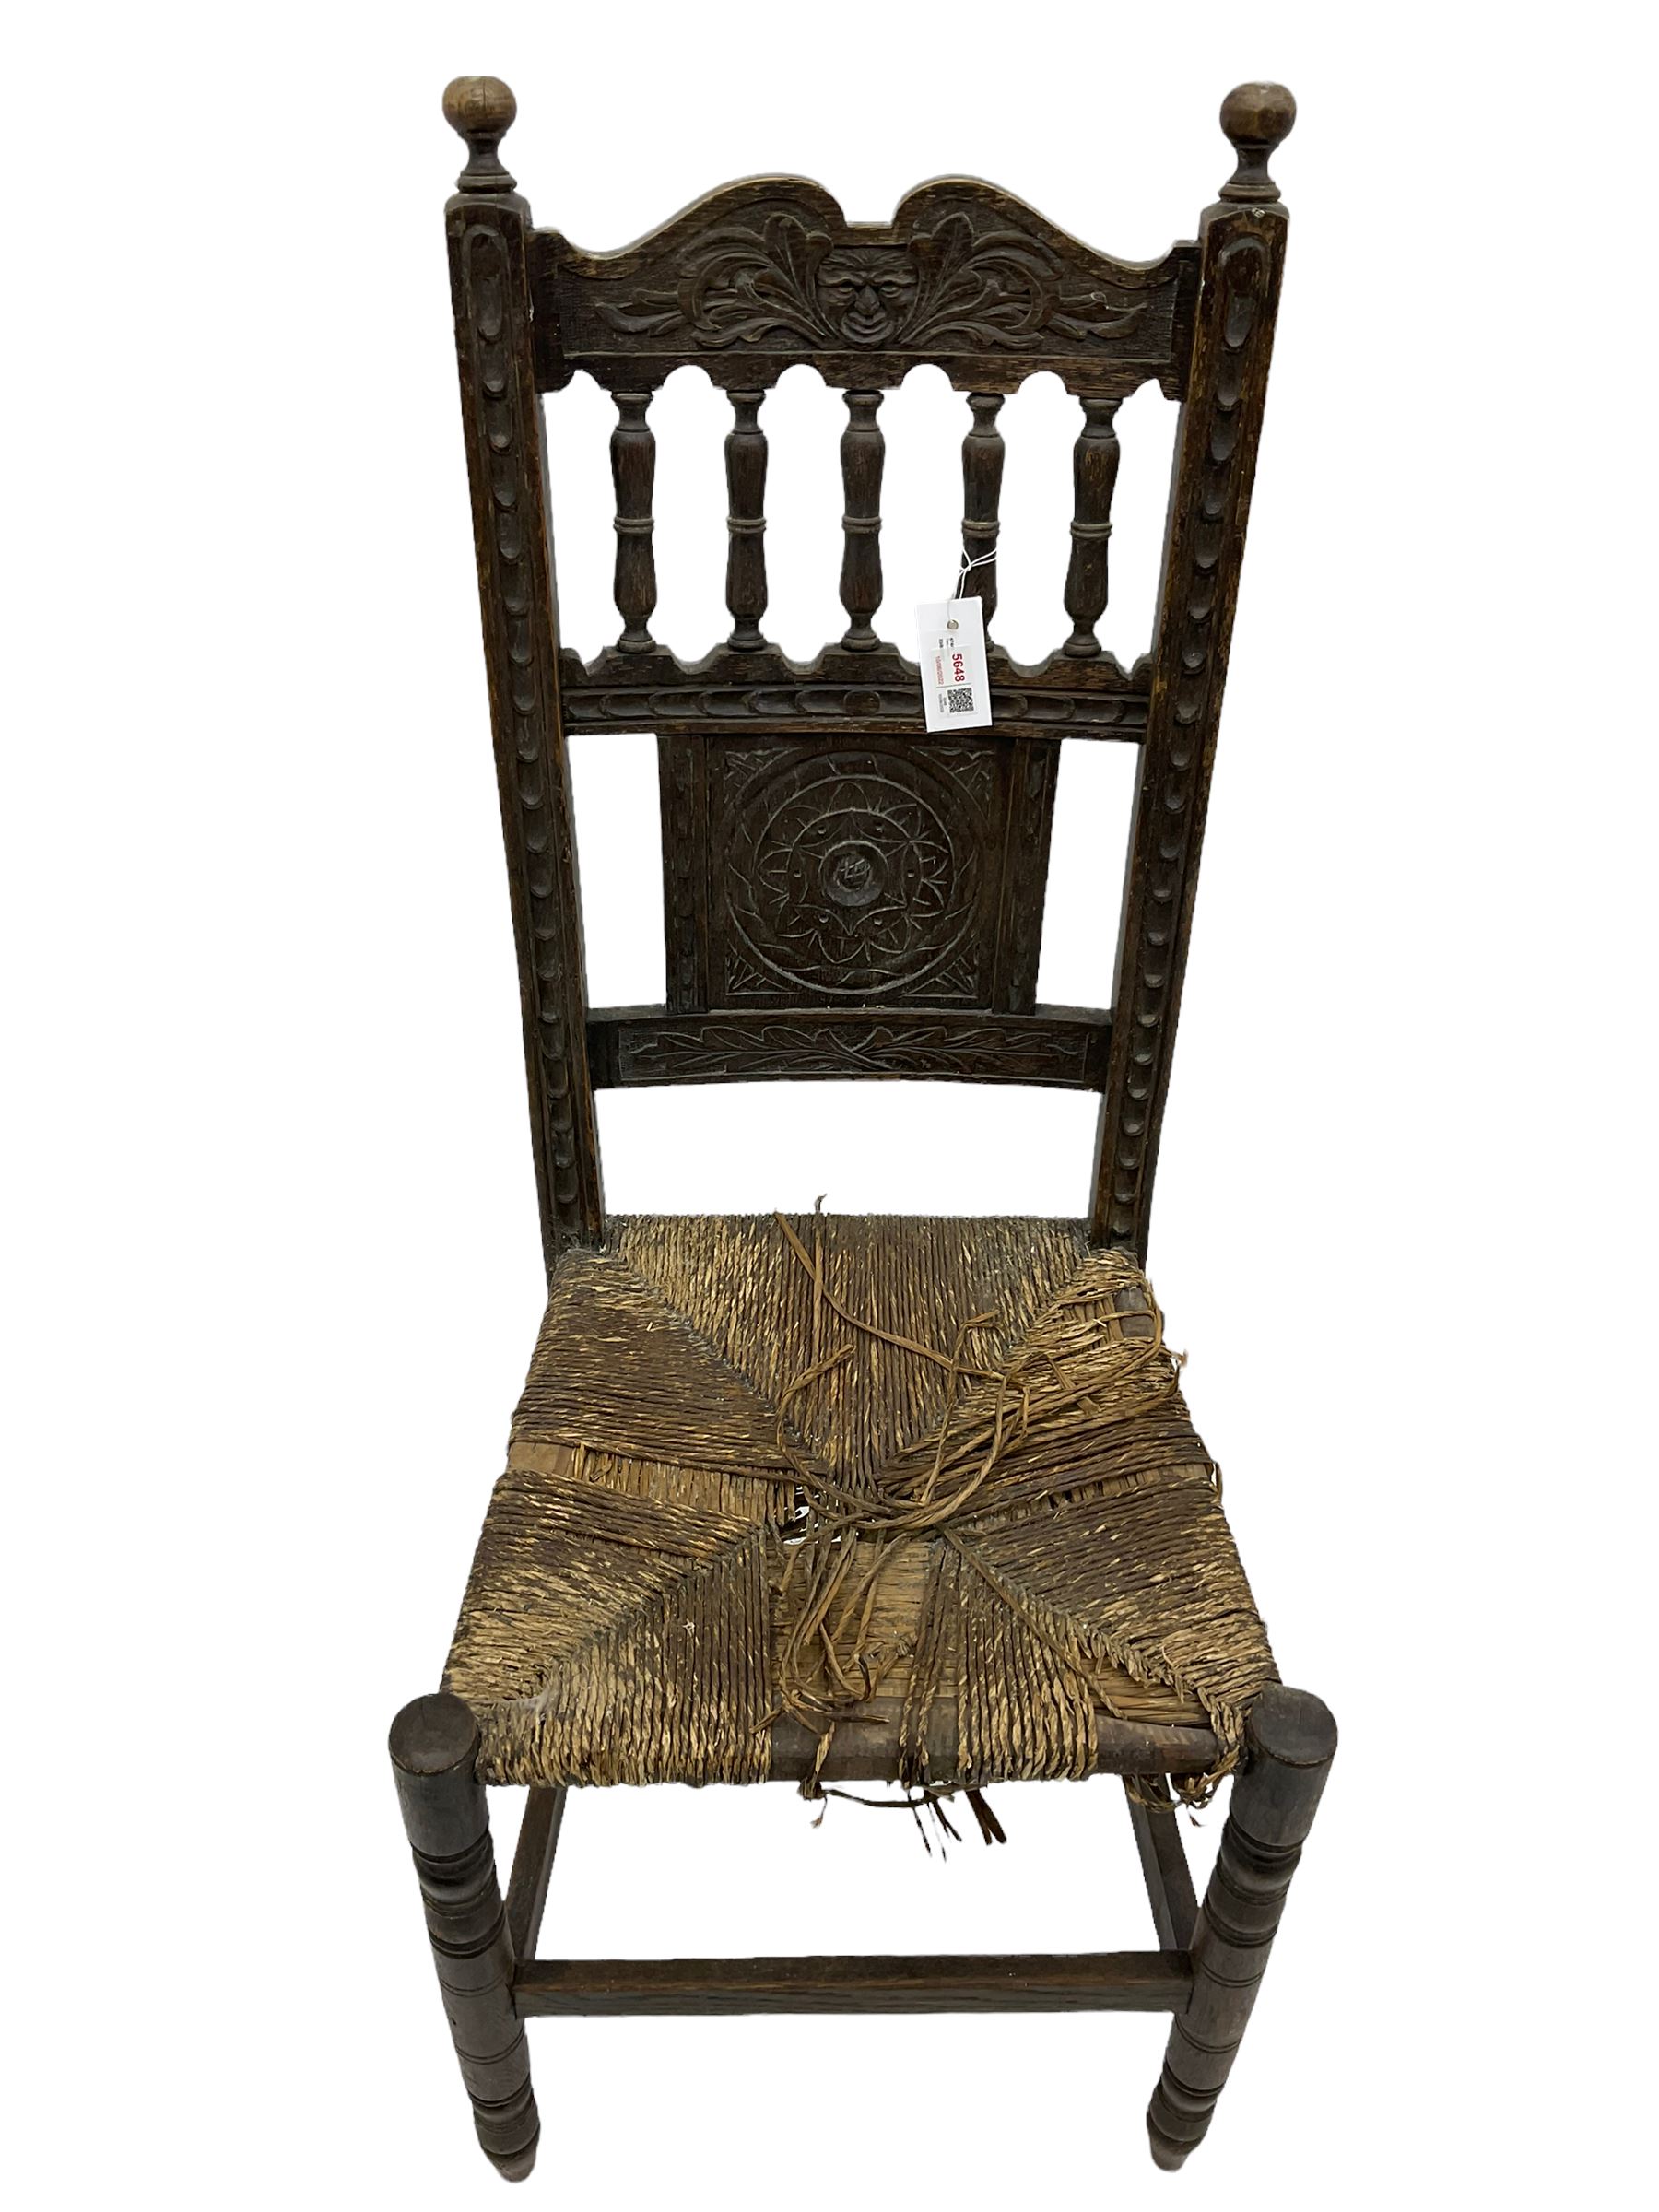 Early oak barley twist chair and a carved chair - Image 4 of 5